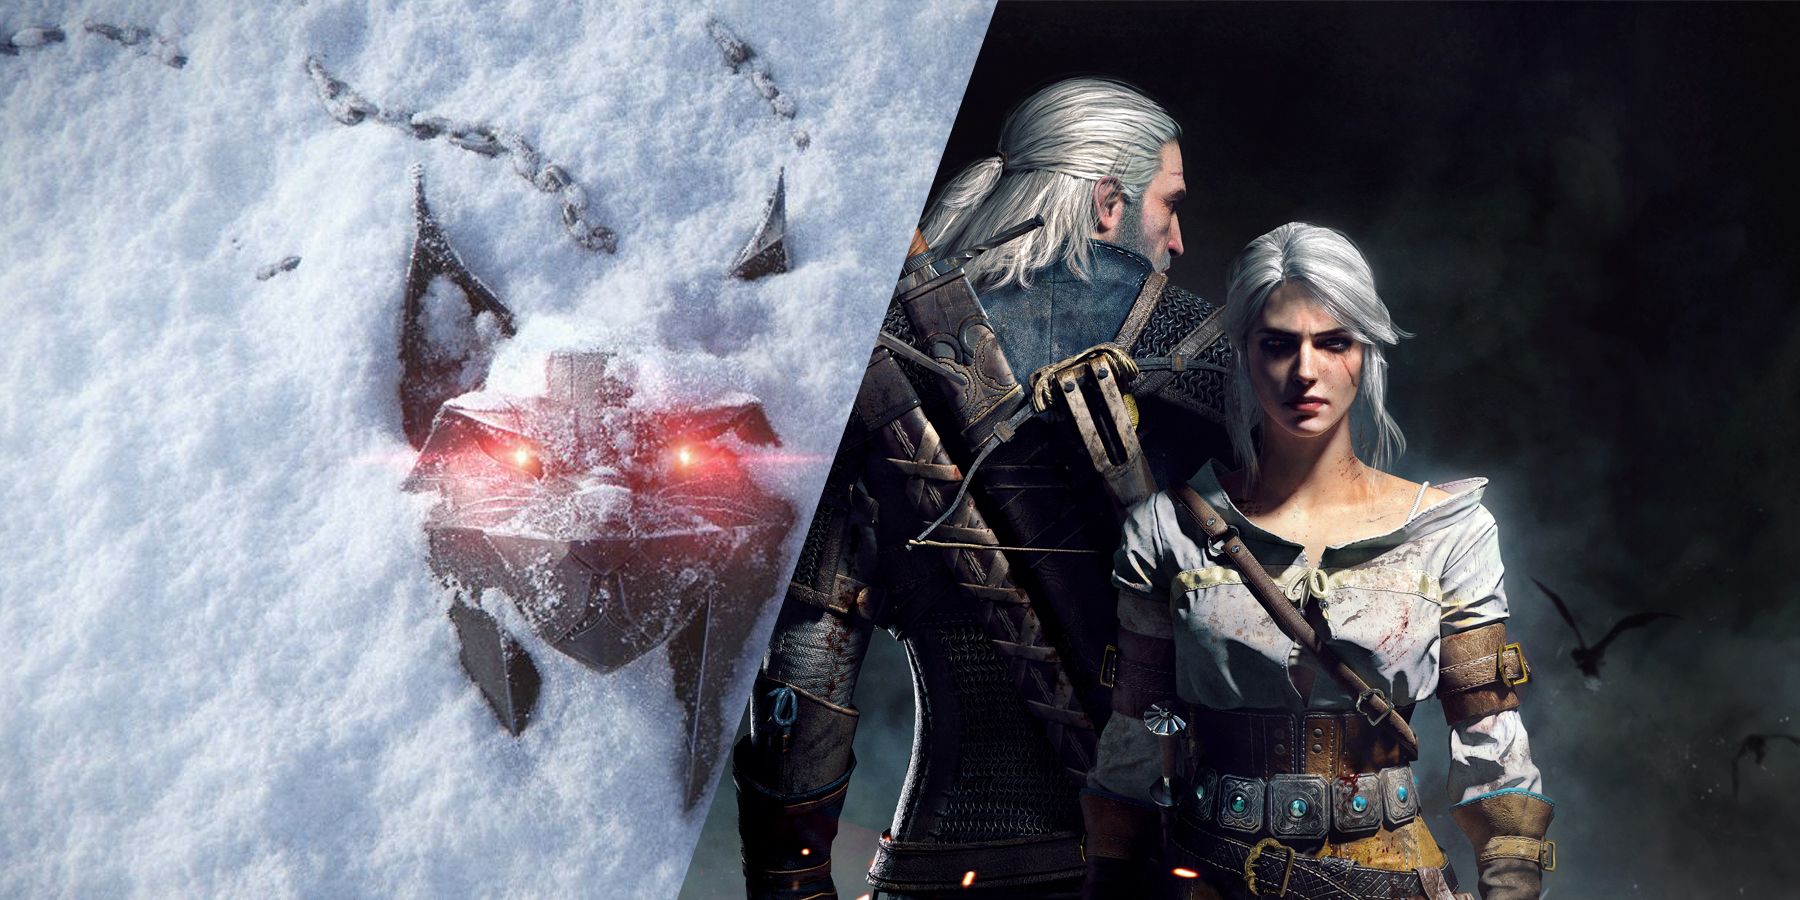 The new Witcher medallion with Geralt of Rivia and Ciri.